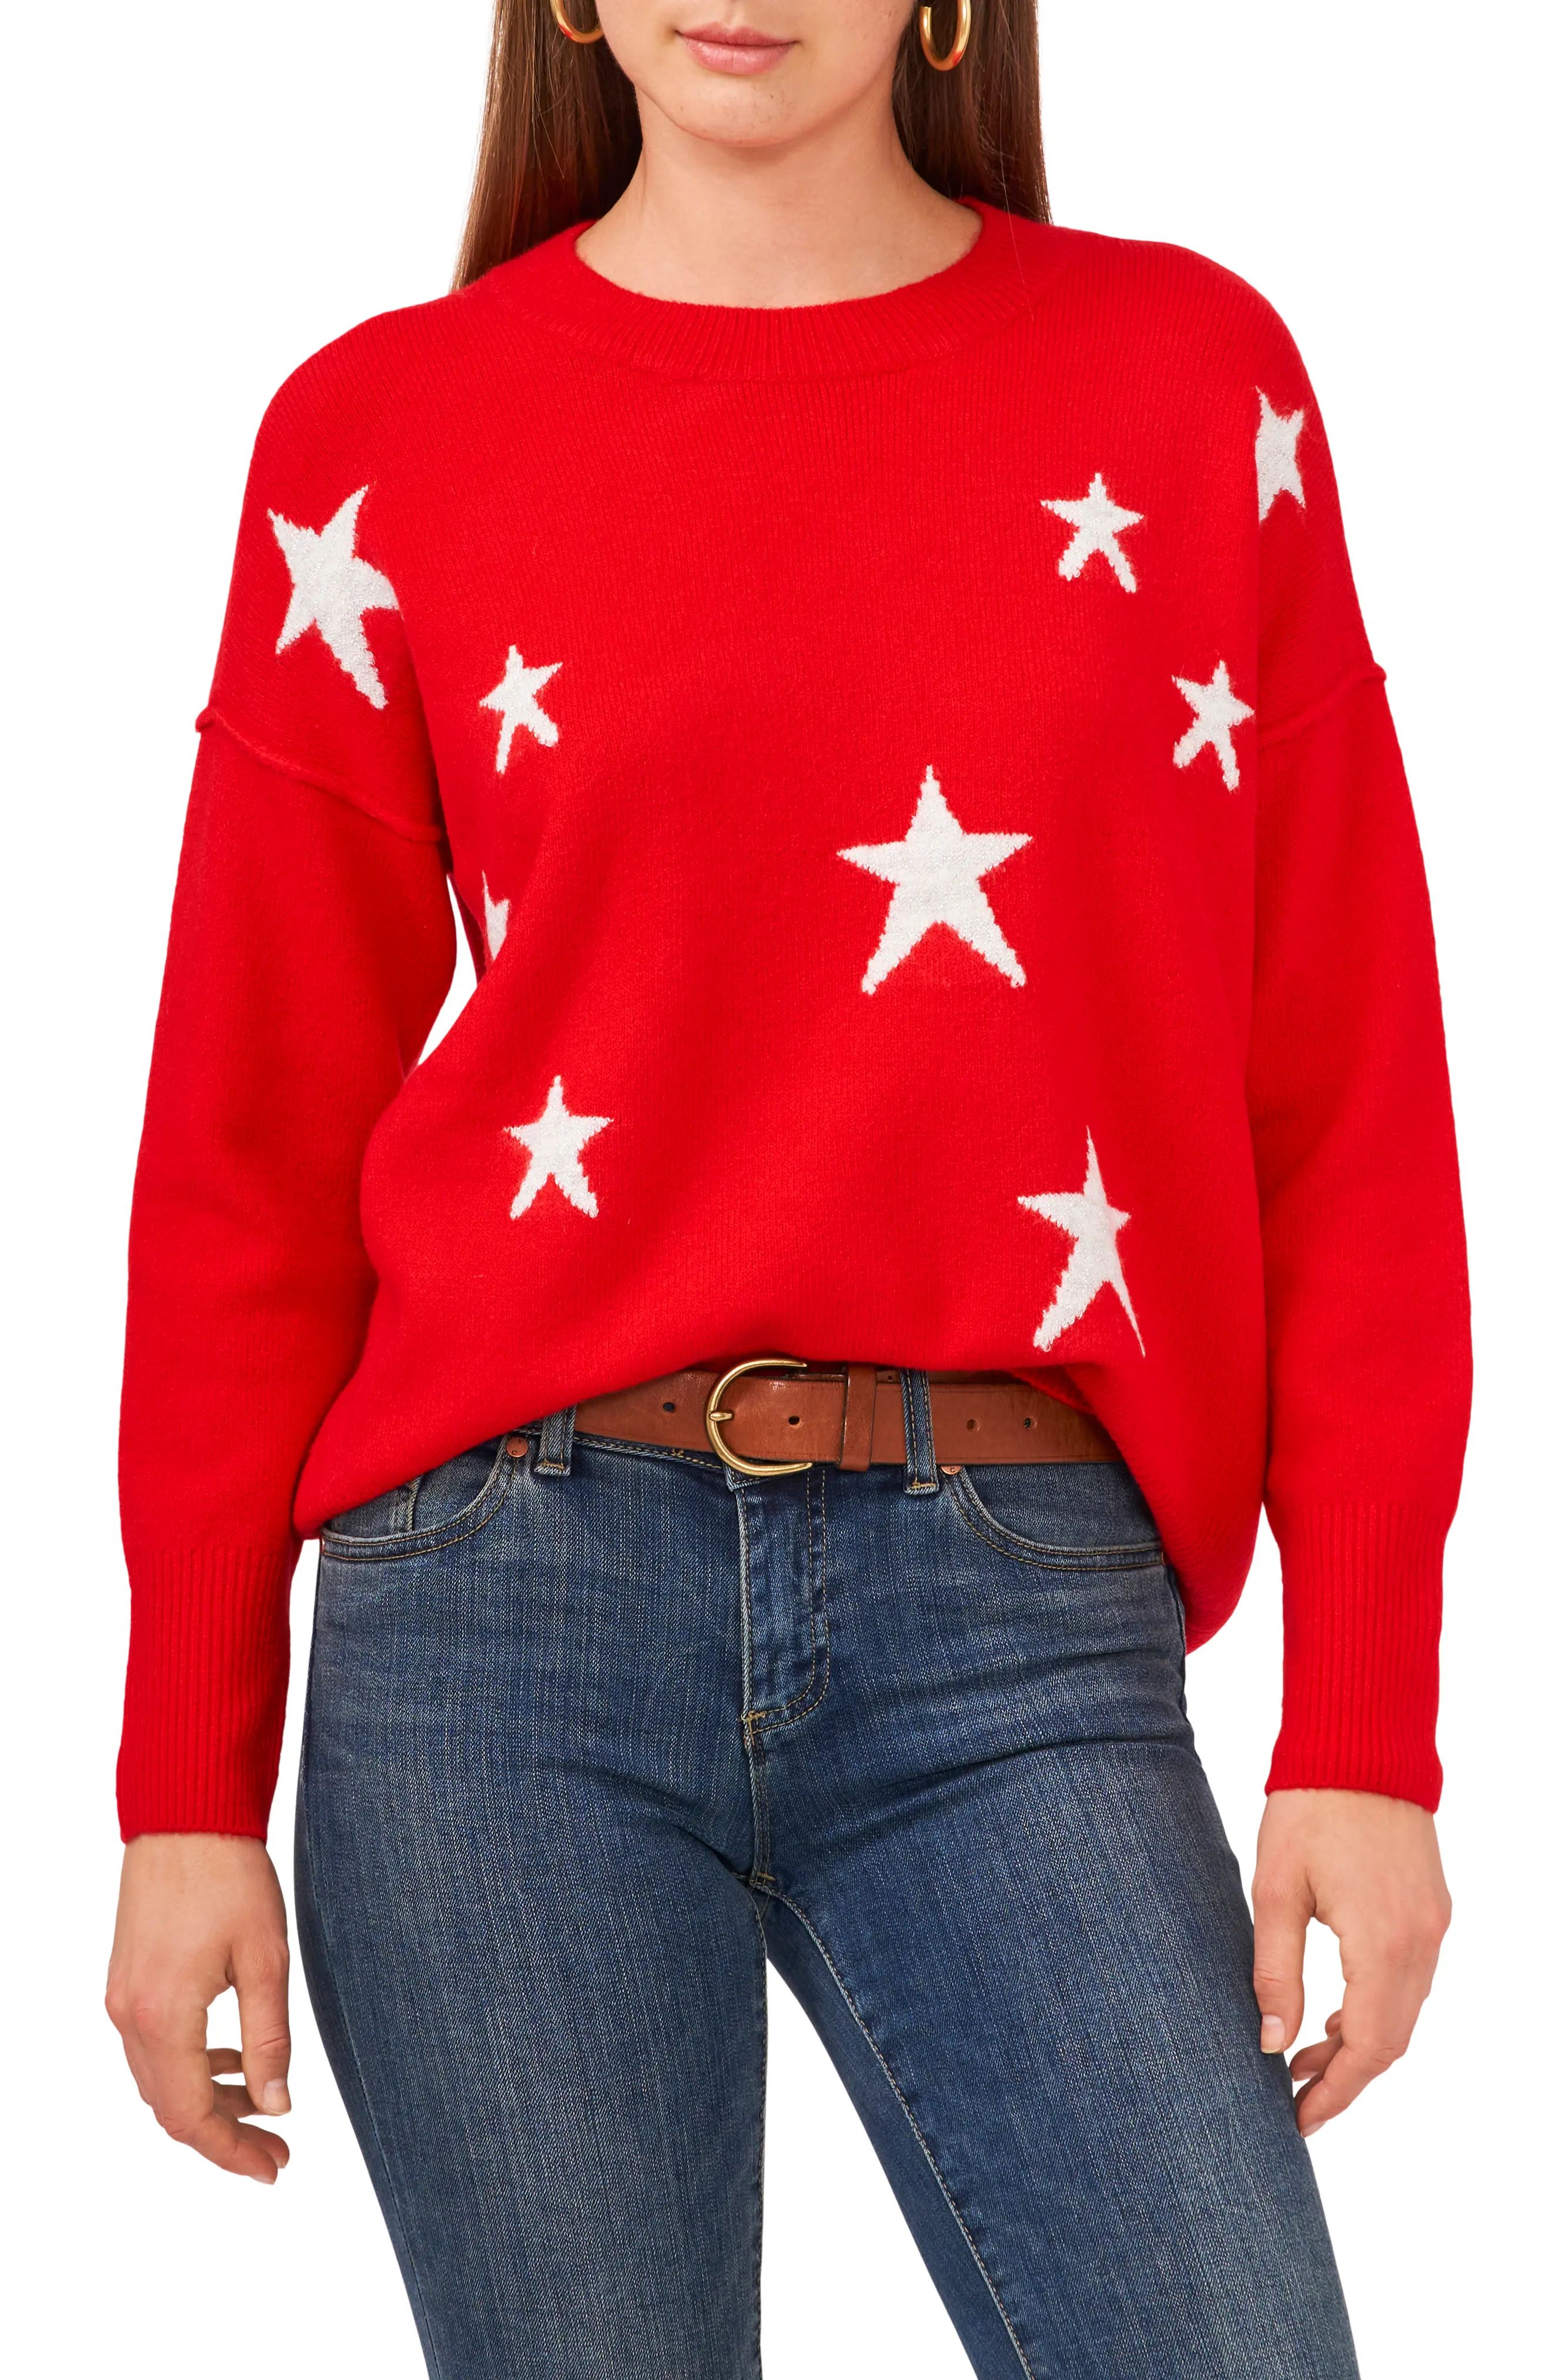 Vince Camuto Star Crewneck Sweater, Size Xx-Small in Bright Cherry at Nordstrom | Nordstrom